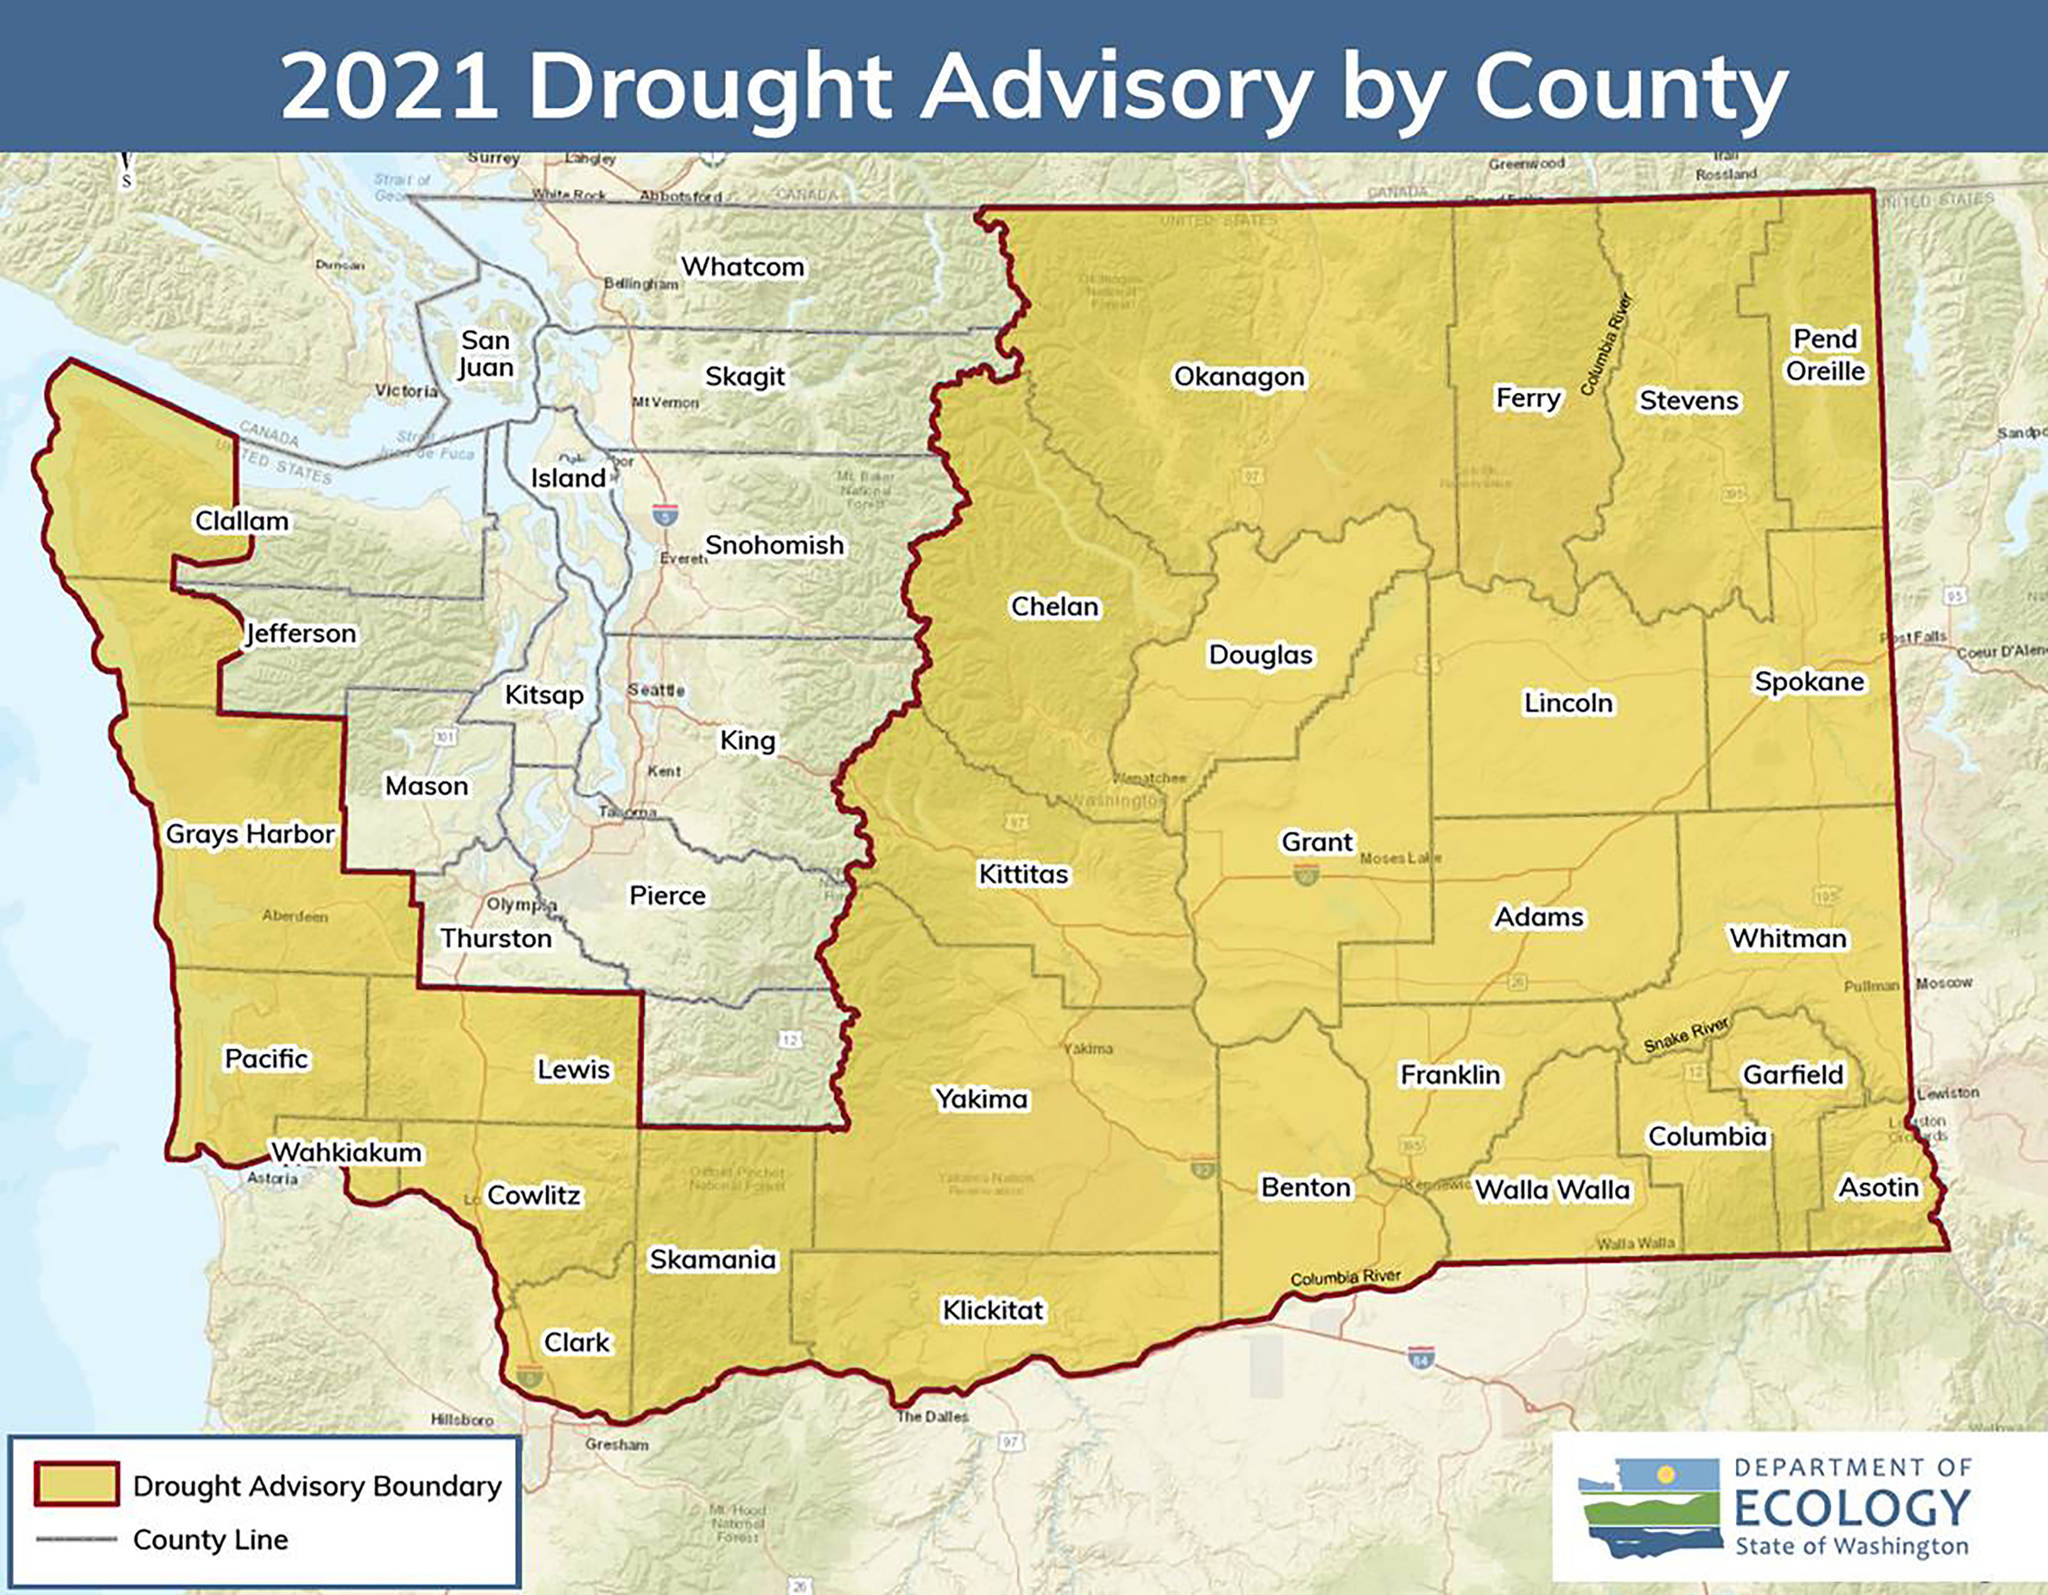 DOE Map
Counties included in the drought advisory as of May 27 are outlined in red.